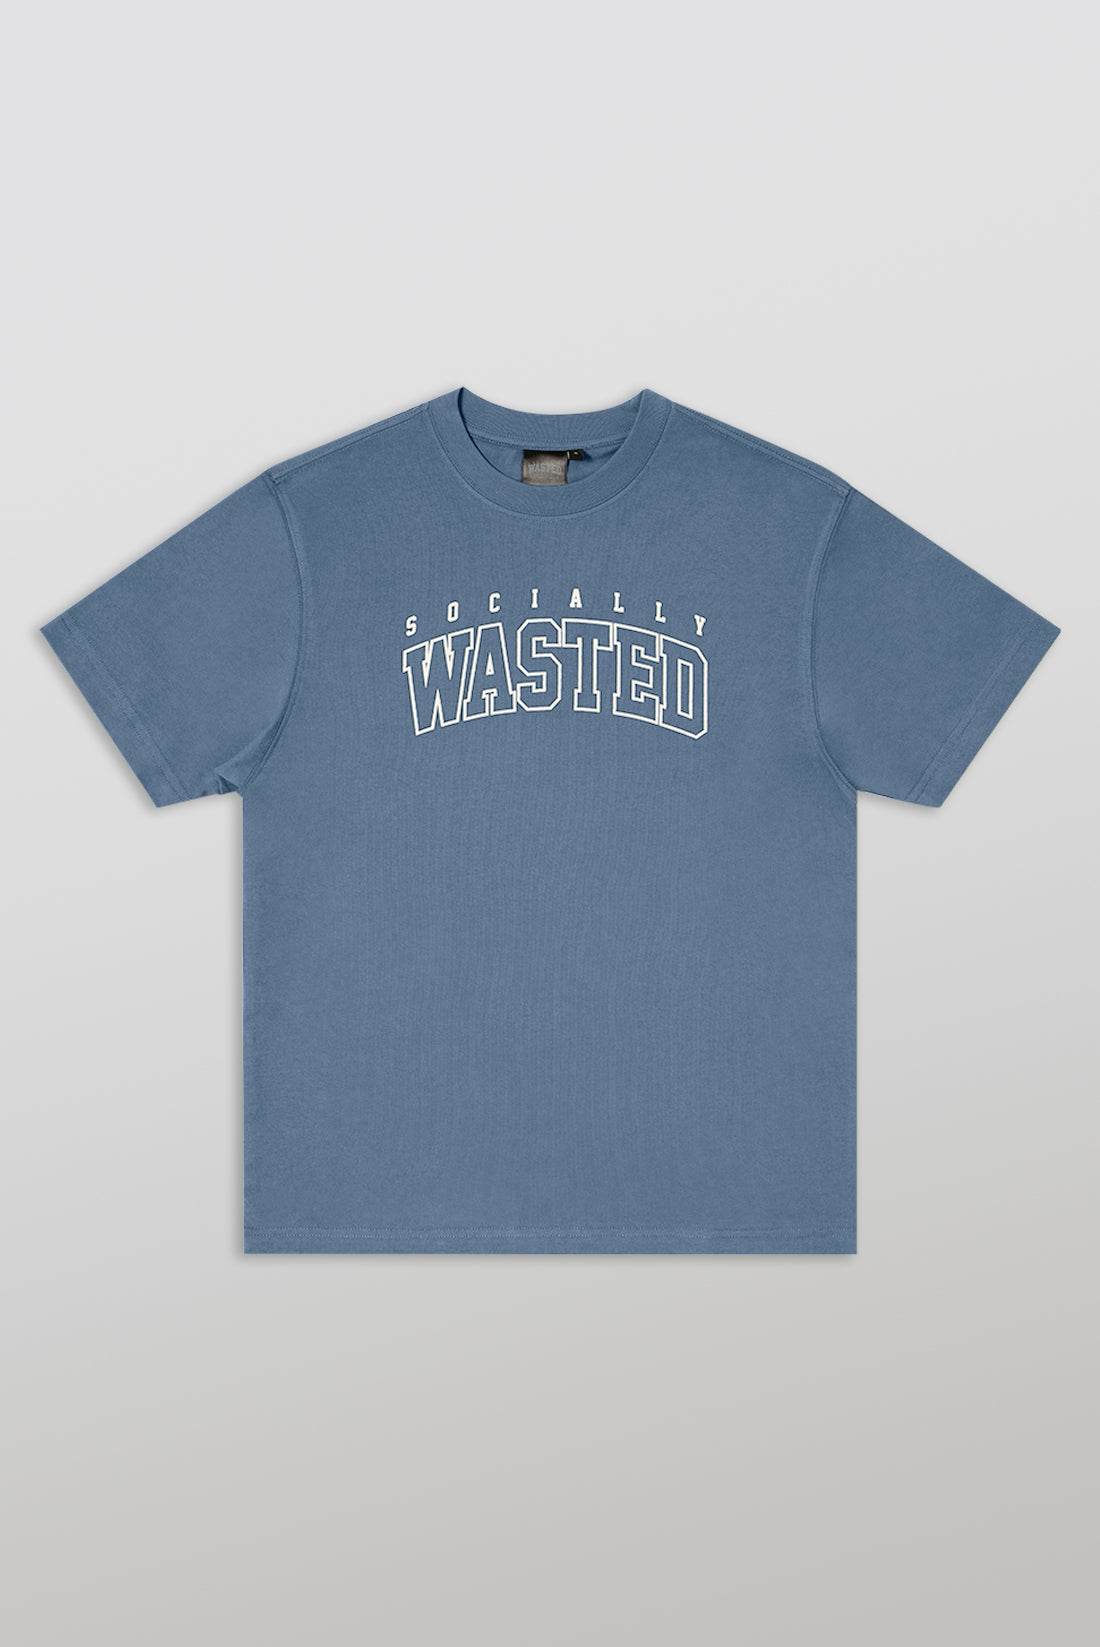 
                  
                    Socially Wasted Flagship Ocean Blue
                  
                